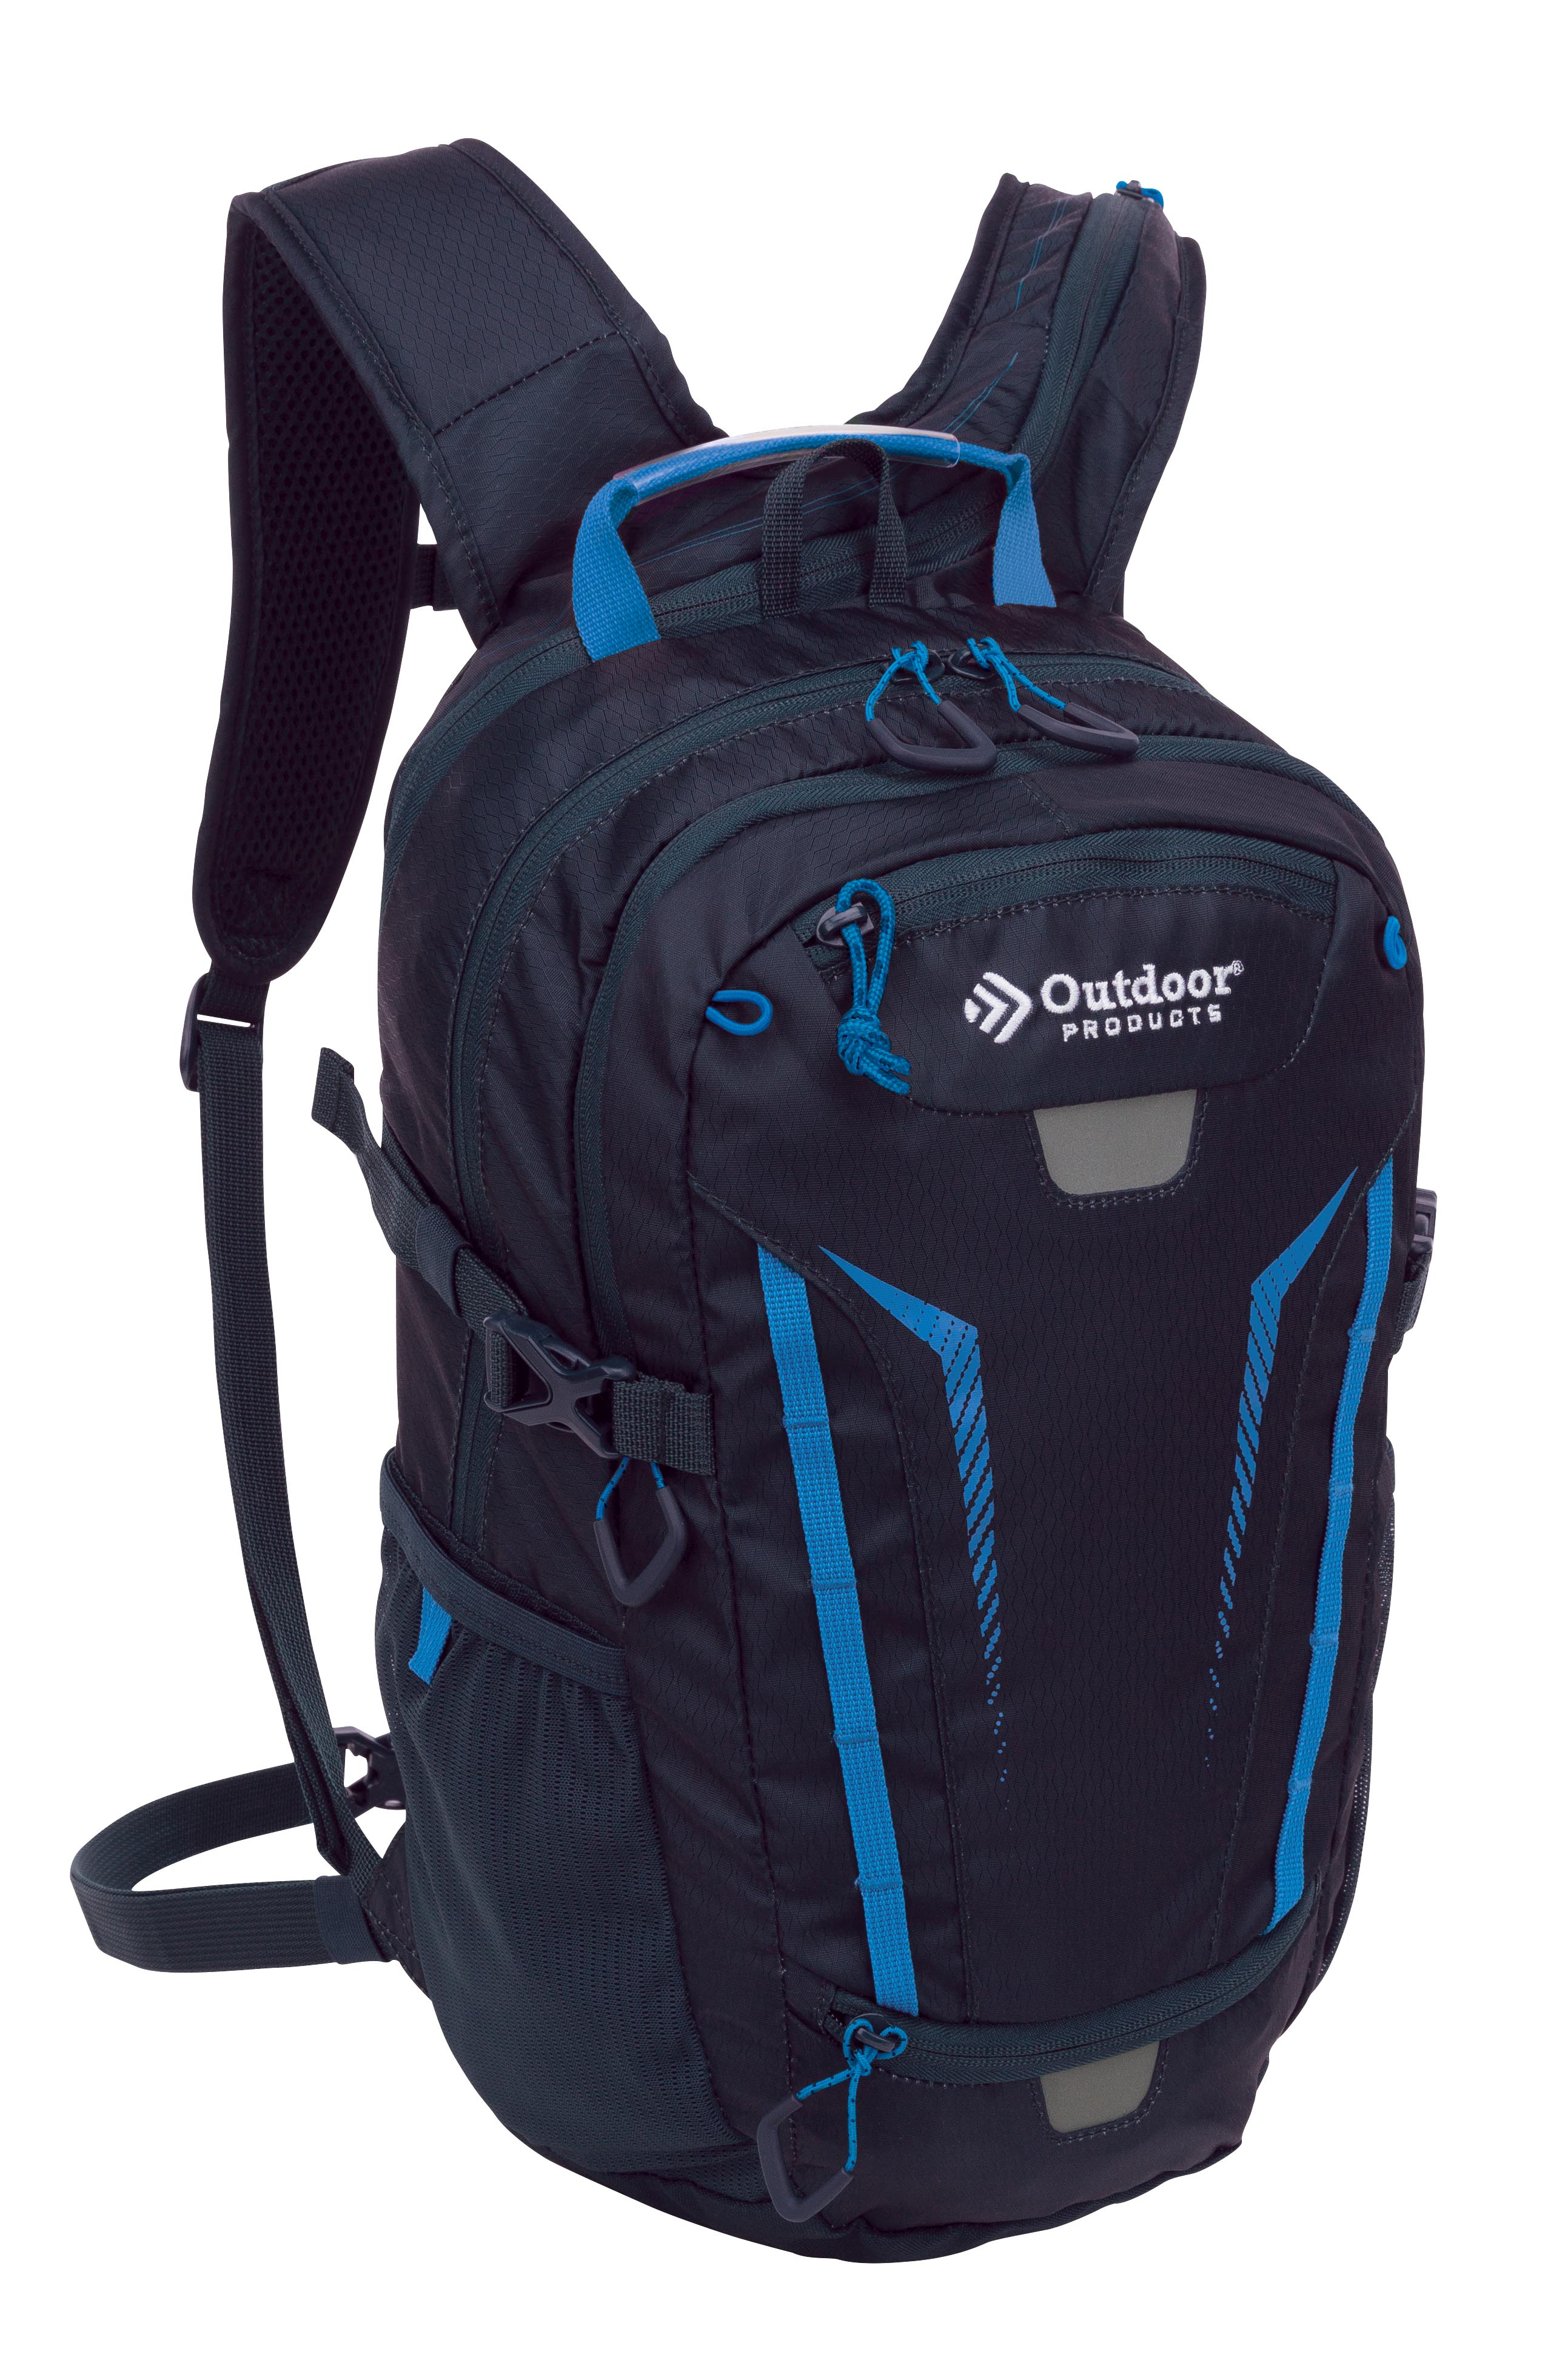 Outdoor Products Deluxe 17 Ltr Hydration Backpack, with 2-Liter Reservoir, Blue, Unisex - image 1 of 12